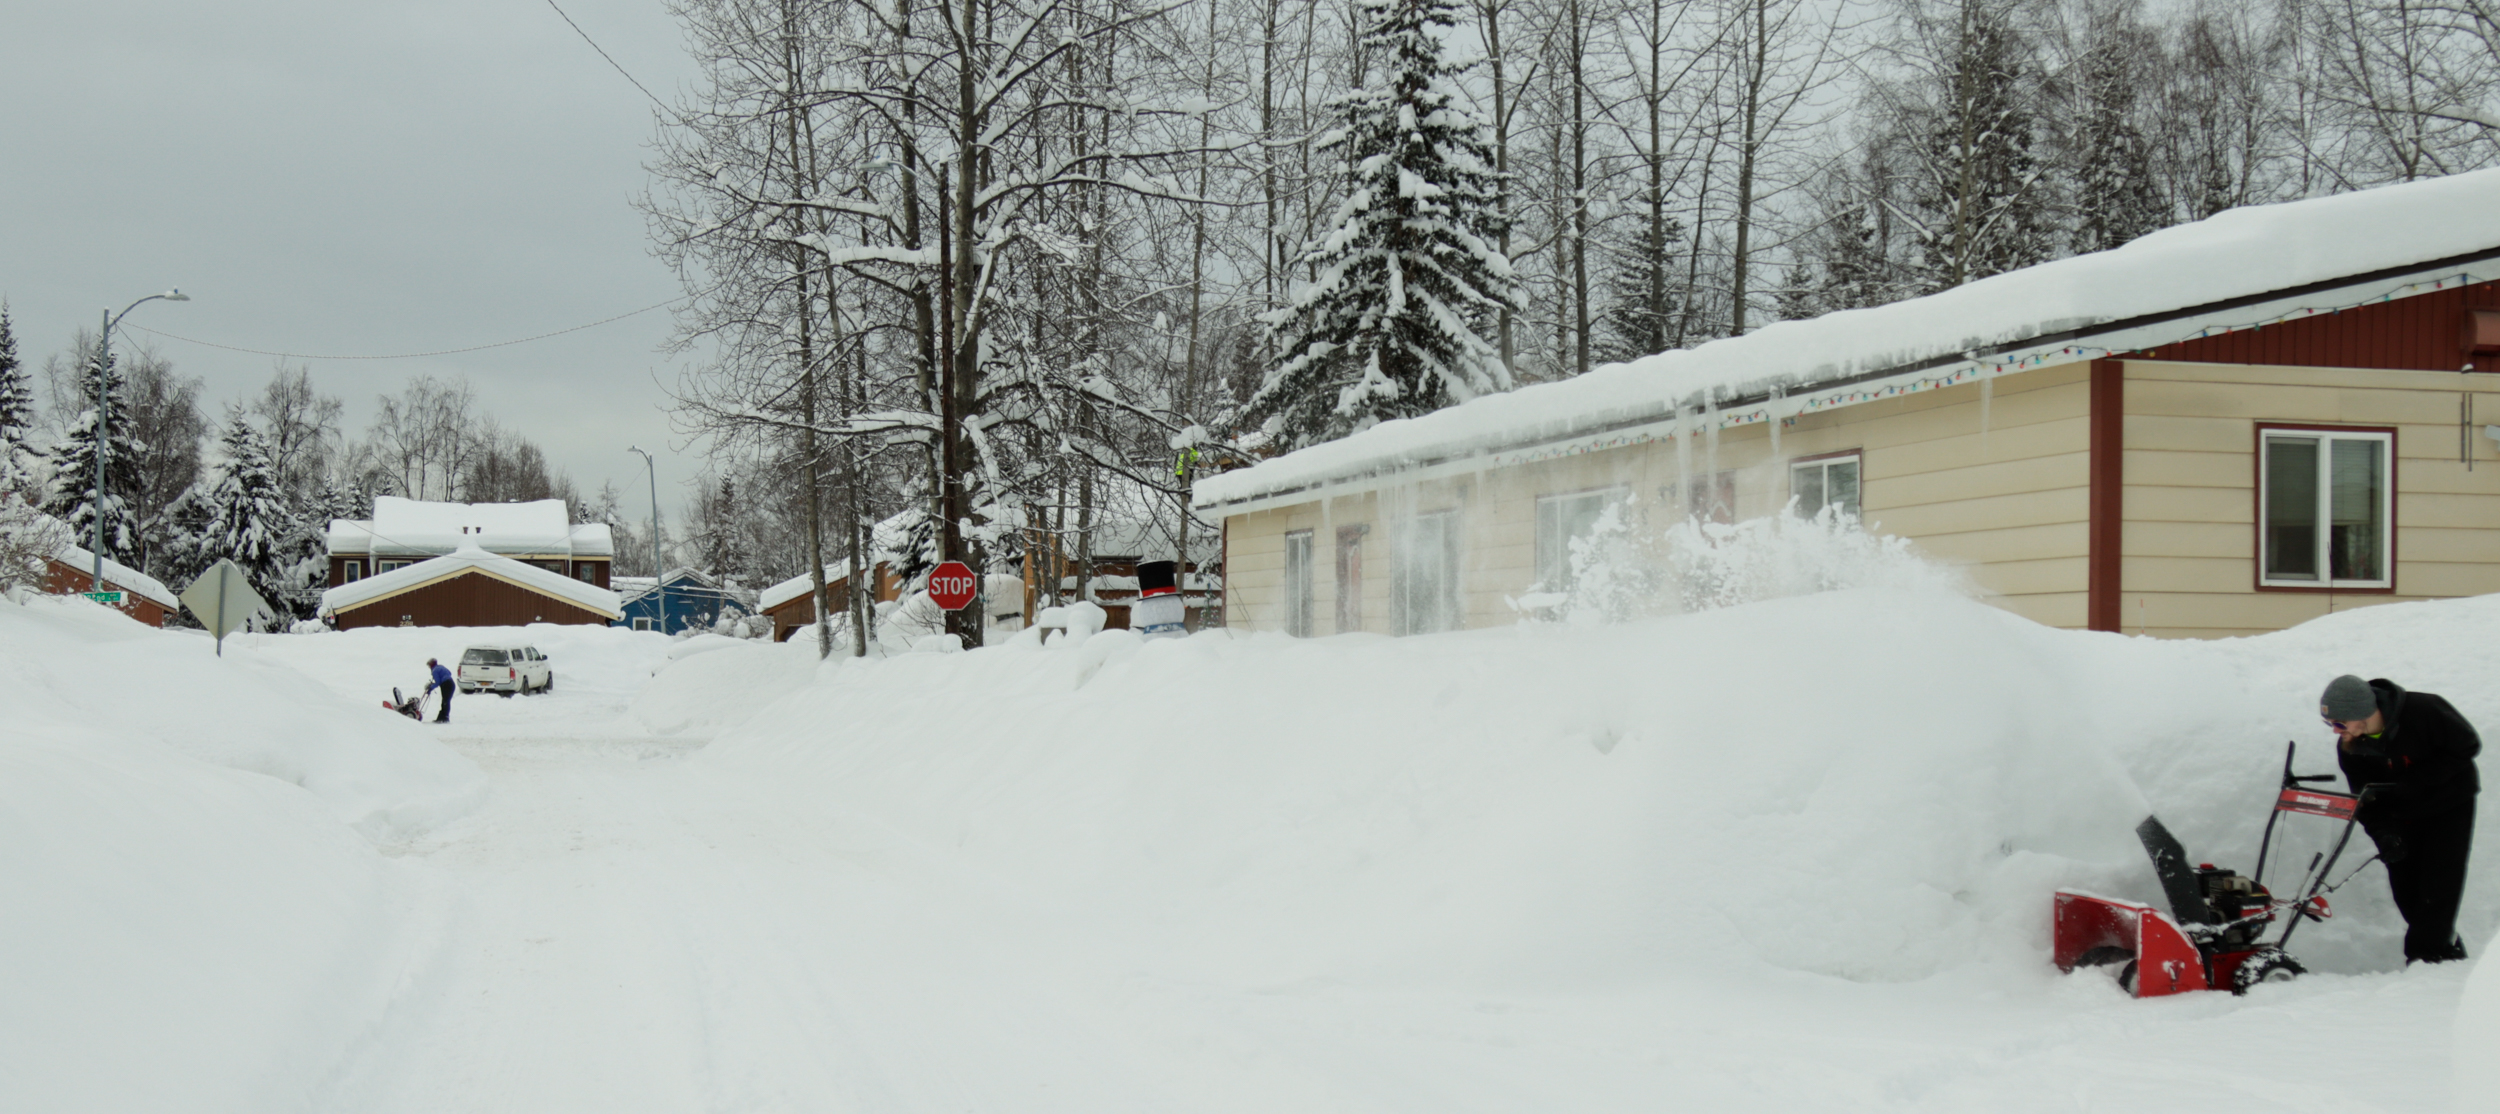 Anchorage has seen almost double its usual snowfall since December